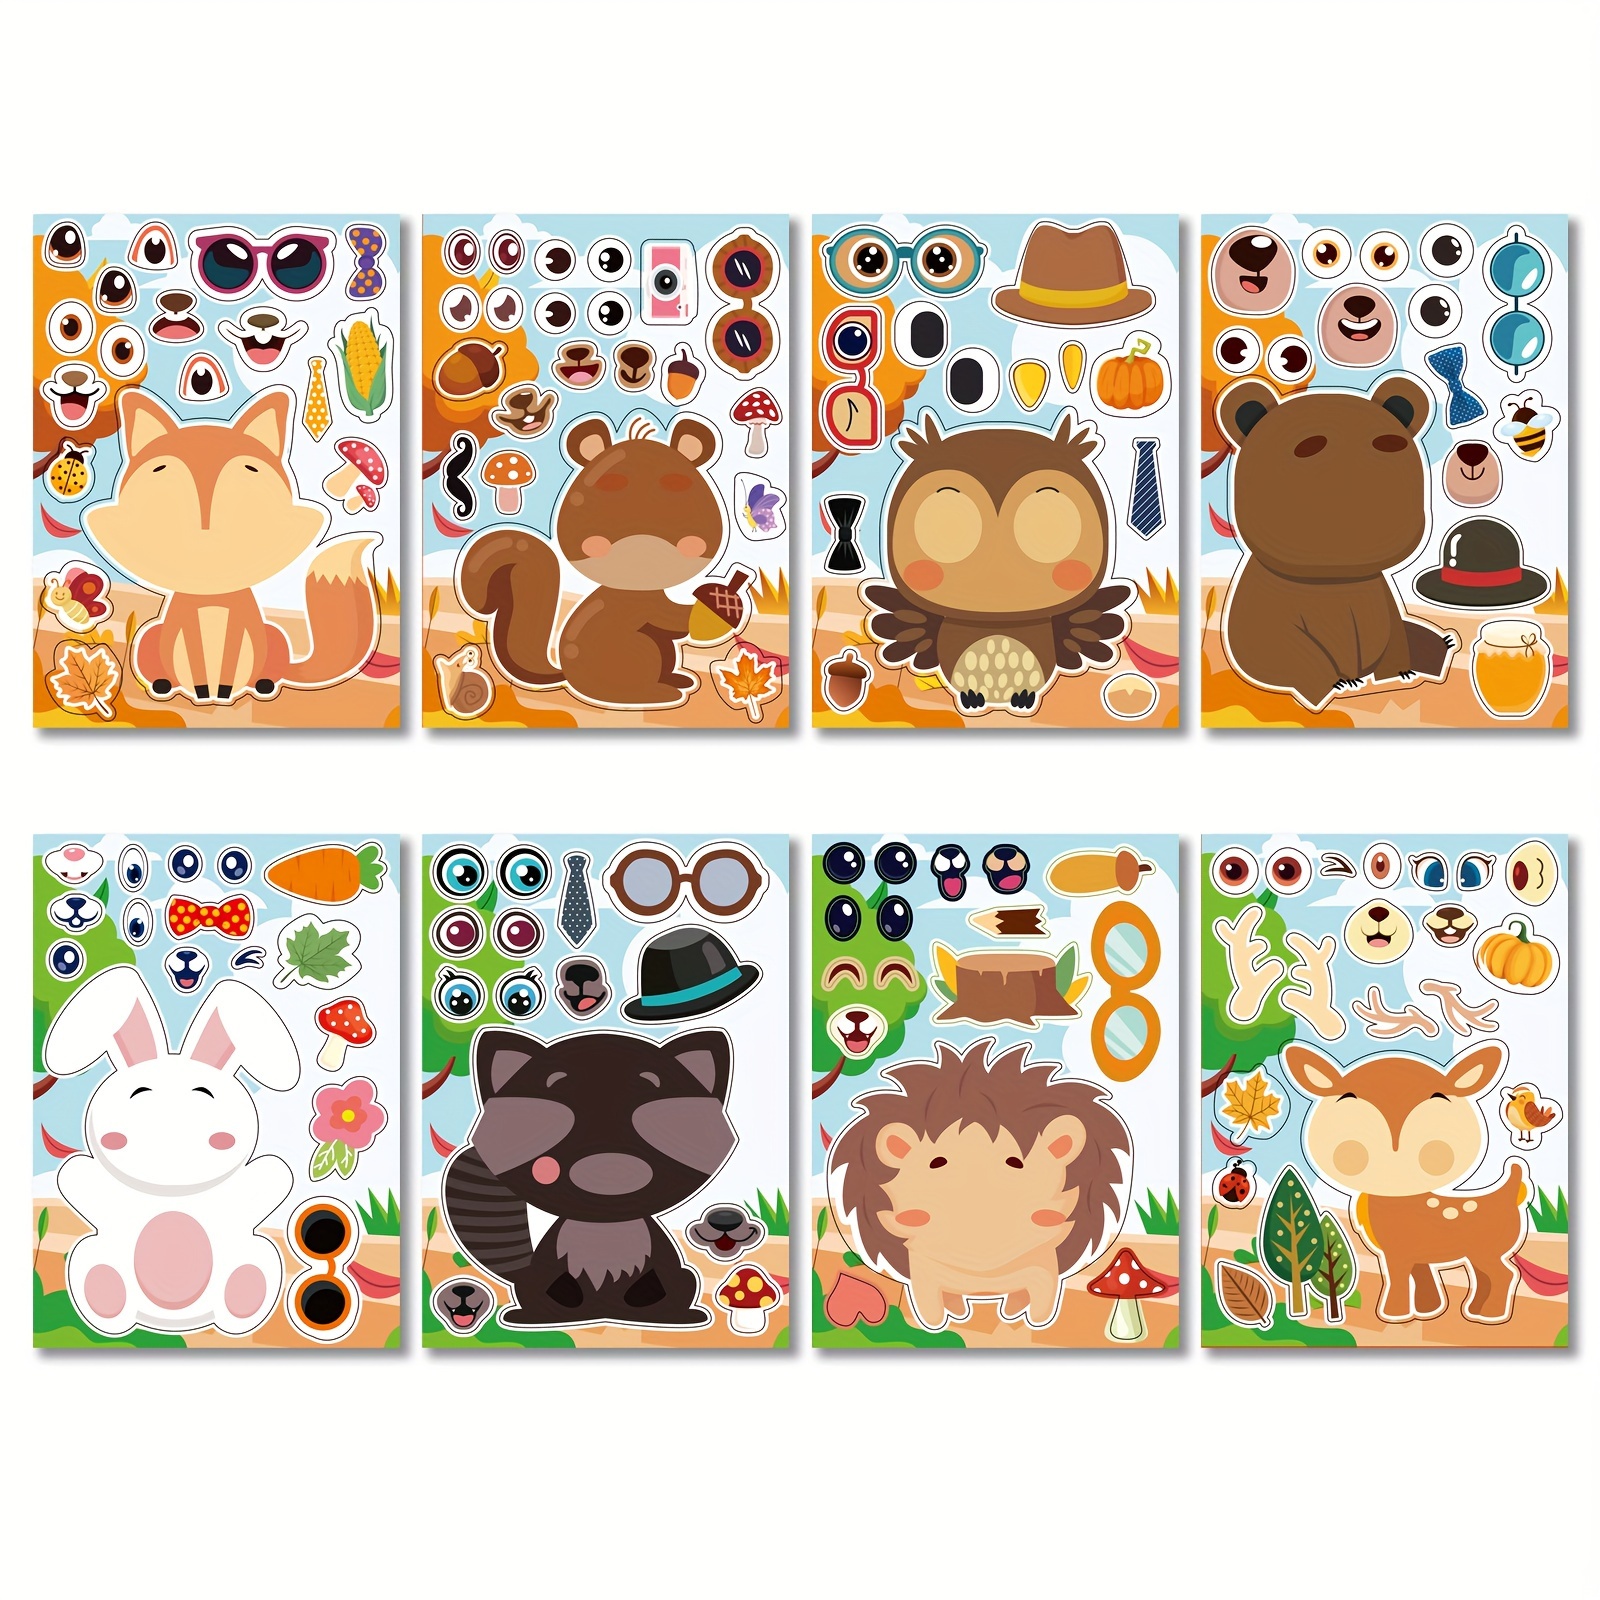 

8 Sheets Cute Bear Stickers Small Animal Puzzles, Cartoon Diy Interactive Entertainment, Birthday And Holiday Gifts